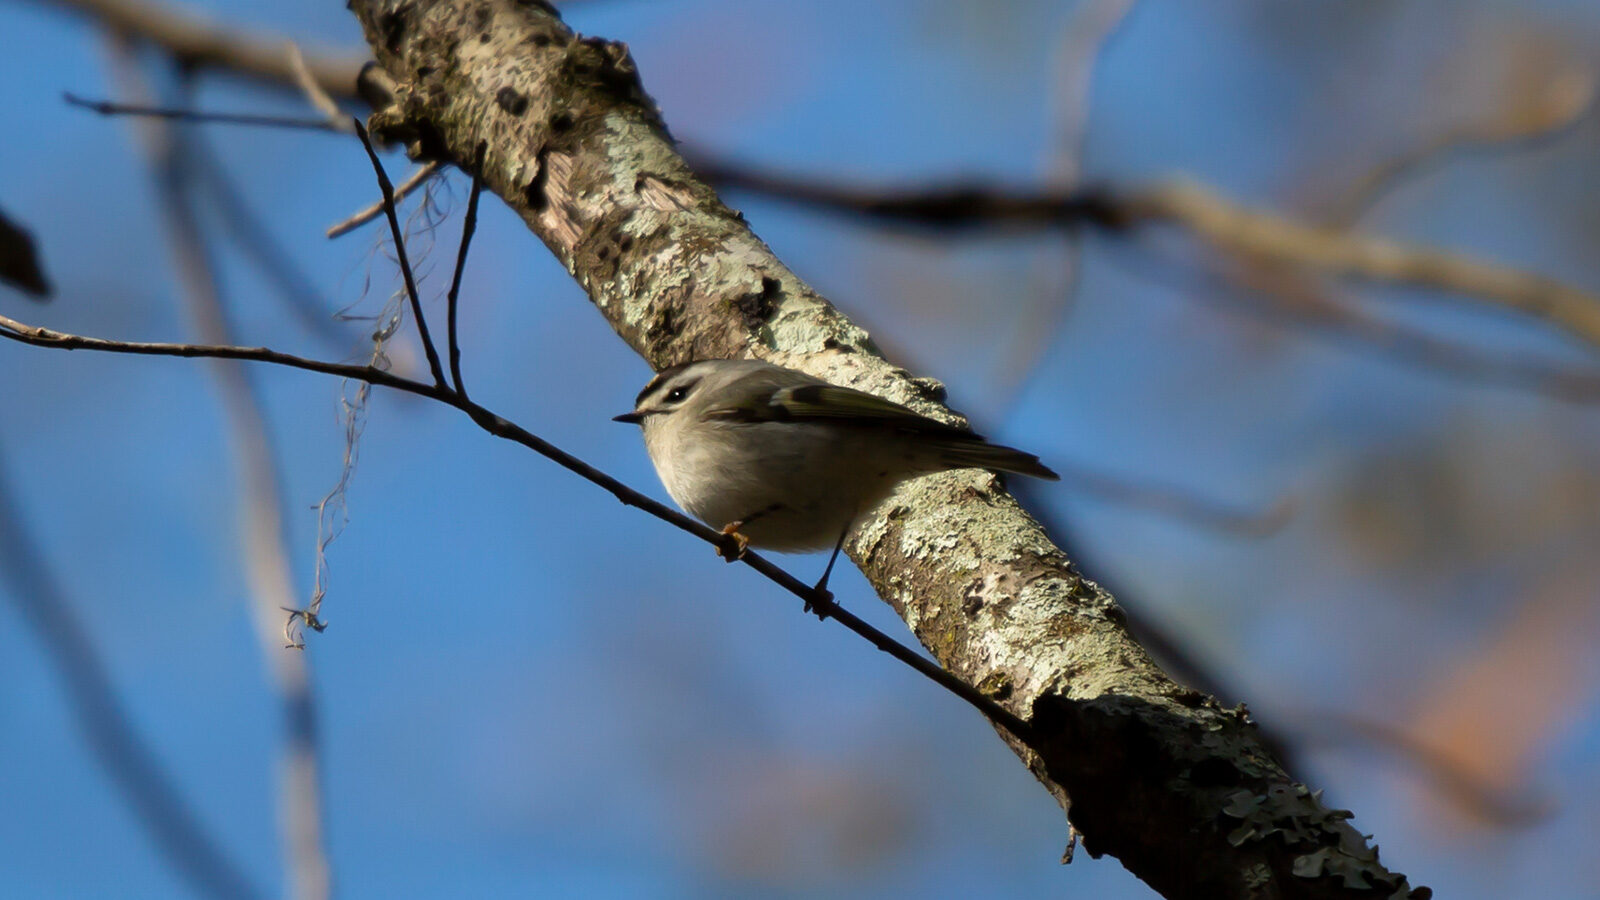 Golden-crowned kinglet perched on a twig